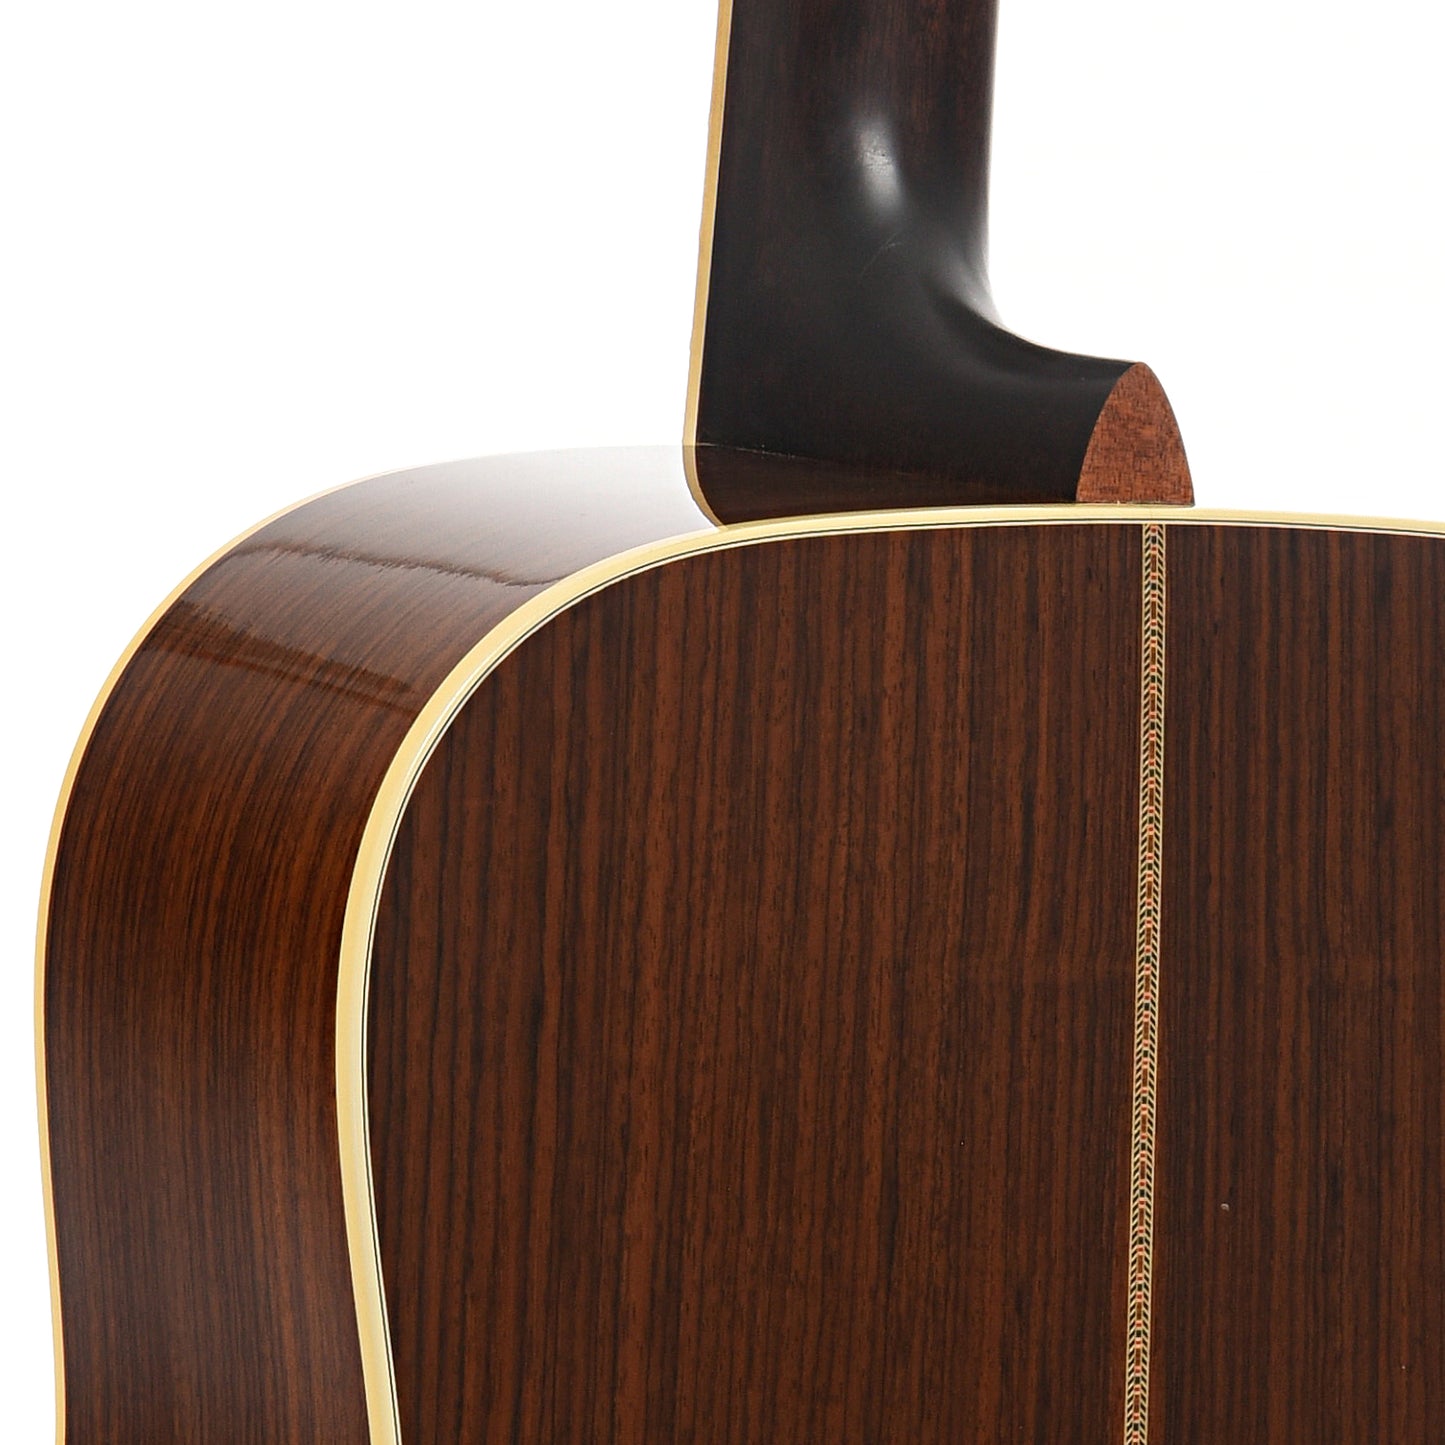 Neck joint of Martin D-41 Acoustic Guitar 